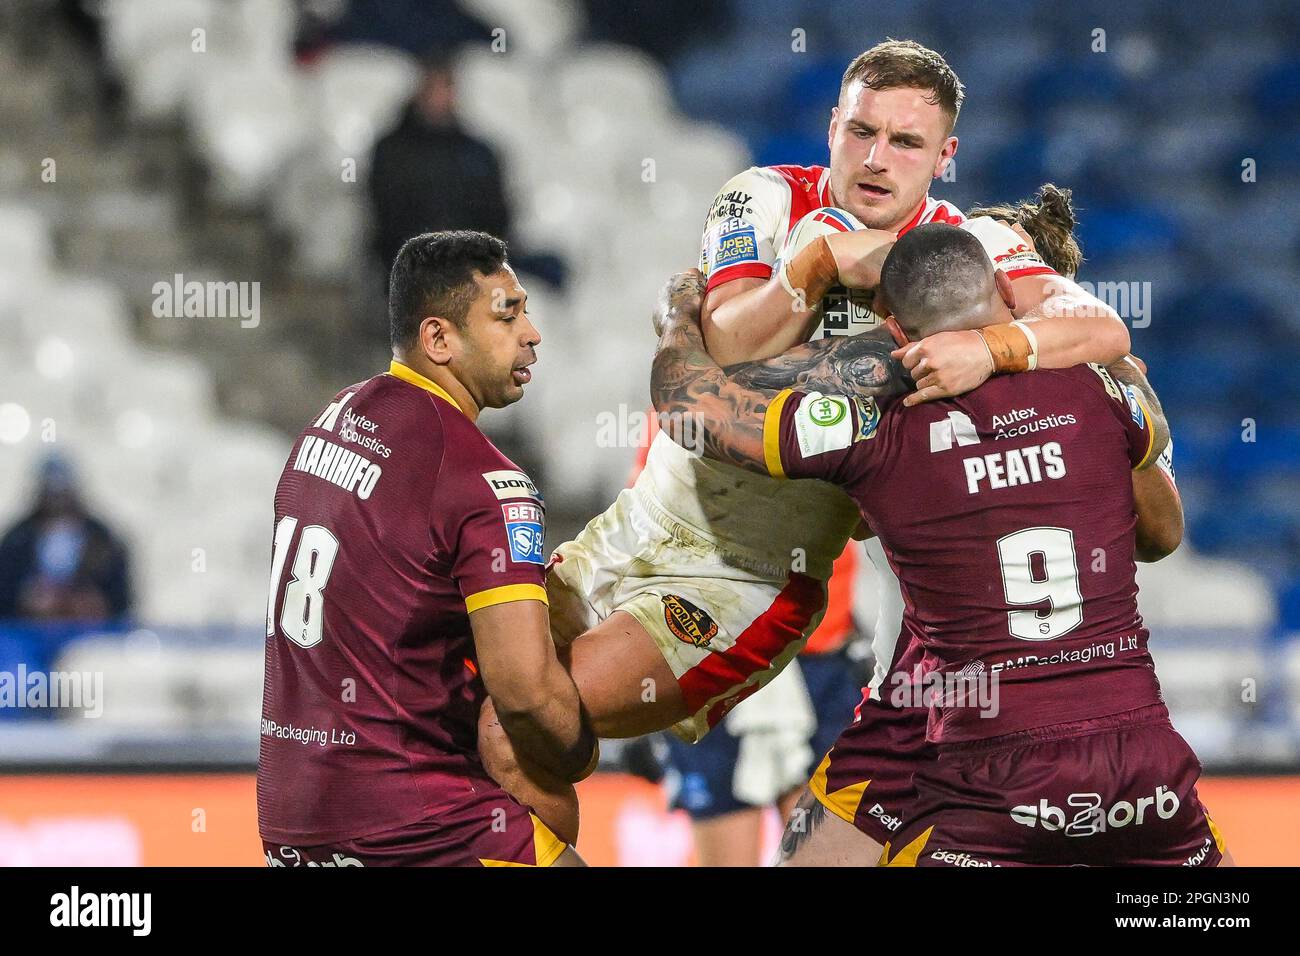 Matty Lees #10 of St Helens is tackled by Nathan Peats #9 and Seb Ikahihifo #18 of Huddersfield Giants during the Betfred Super League Round 6 match Huddersfield Giants vs St Helens at John Smith's Stadium, Huddersfield, United Kingdom, 23rd March 2023  (Photo by Craig Thomas/News Images) Stock Photo